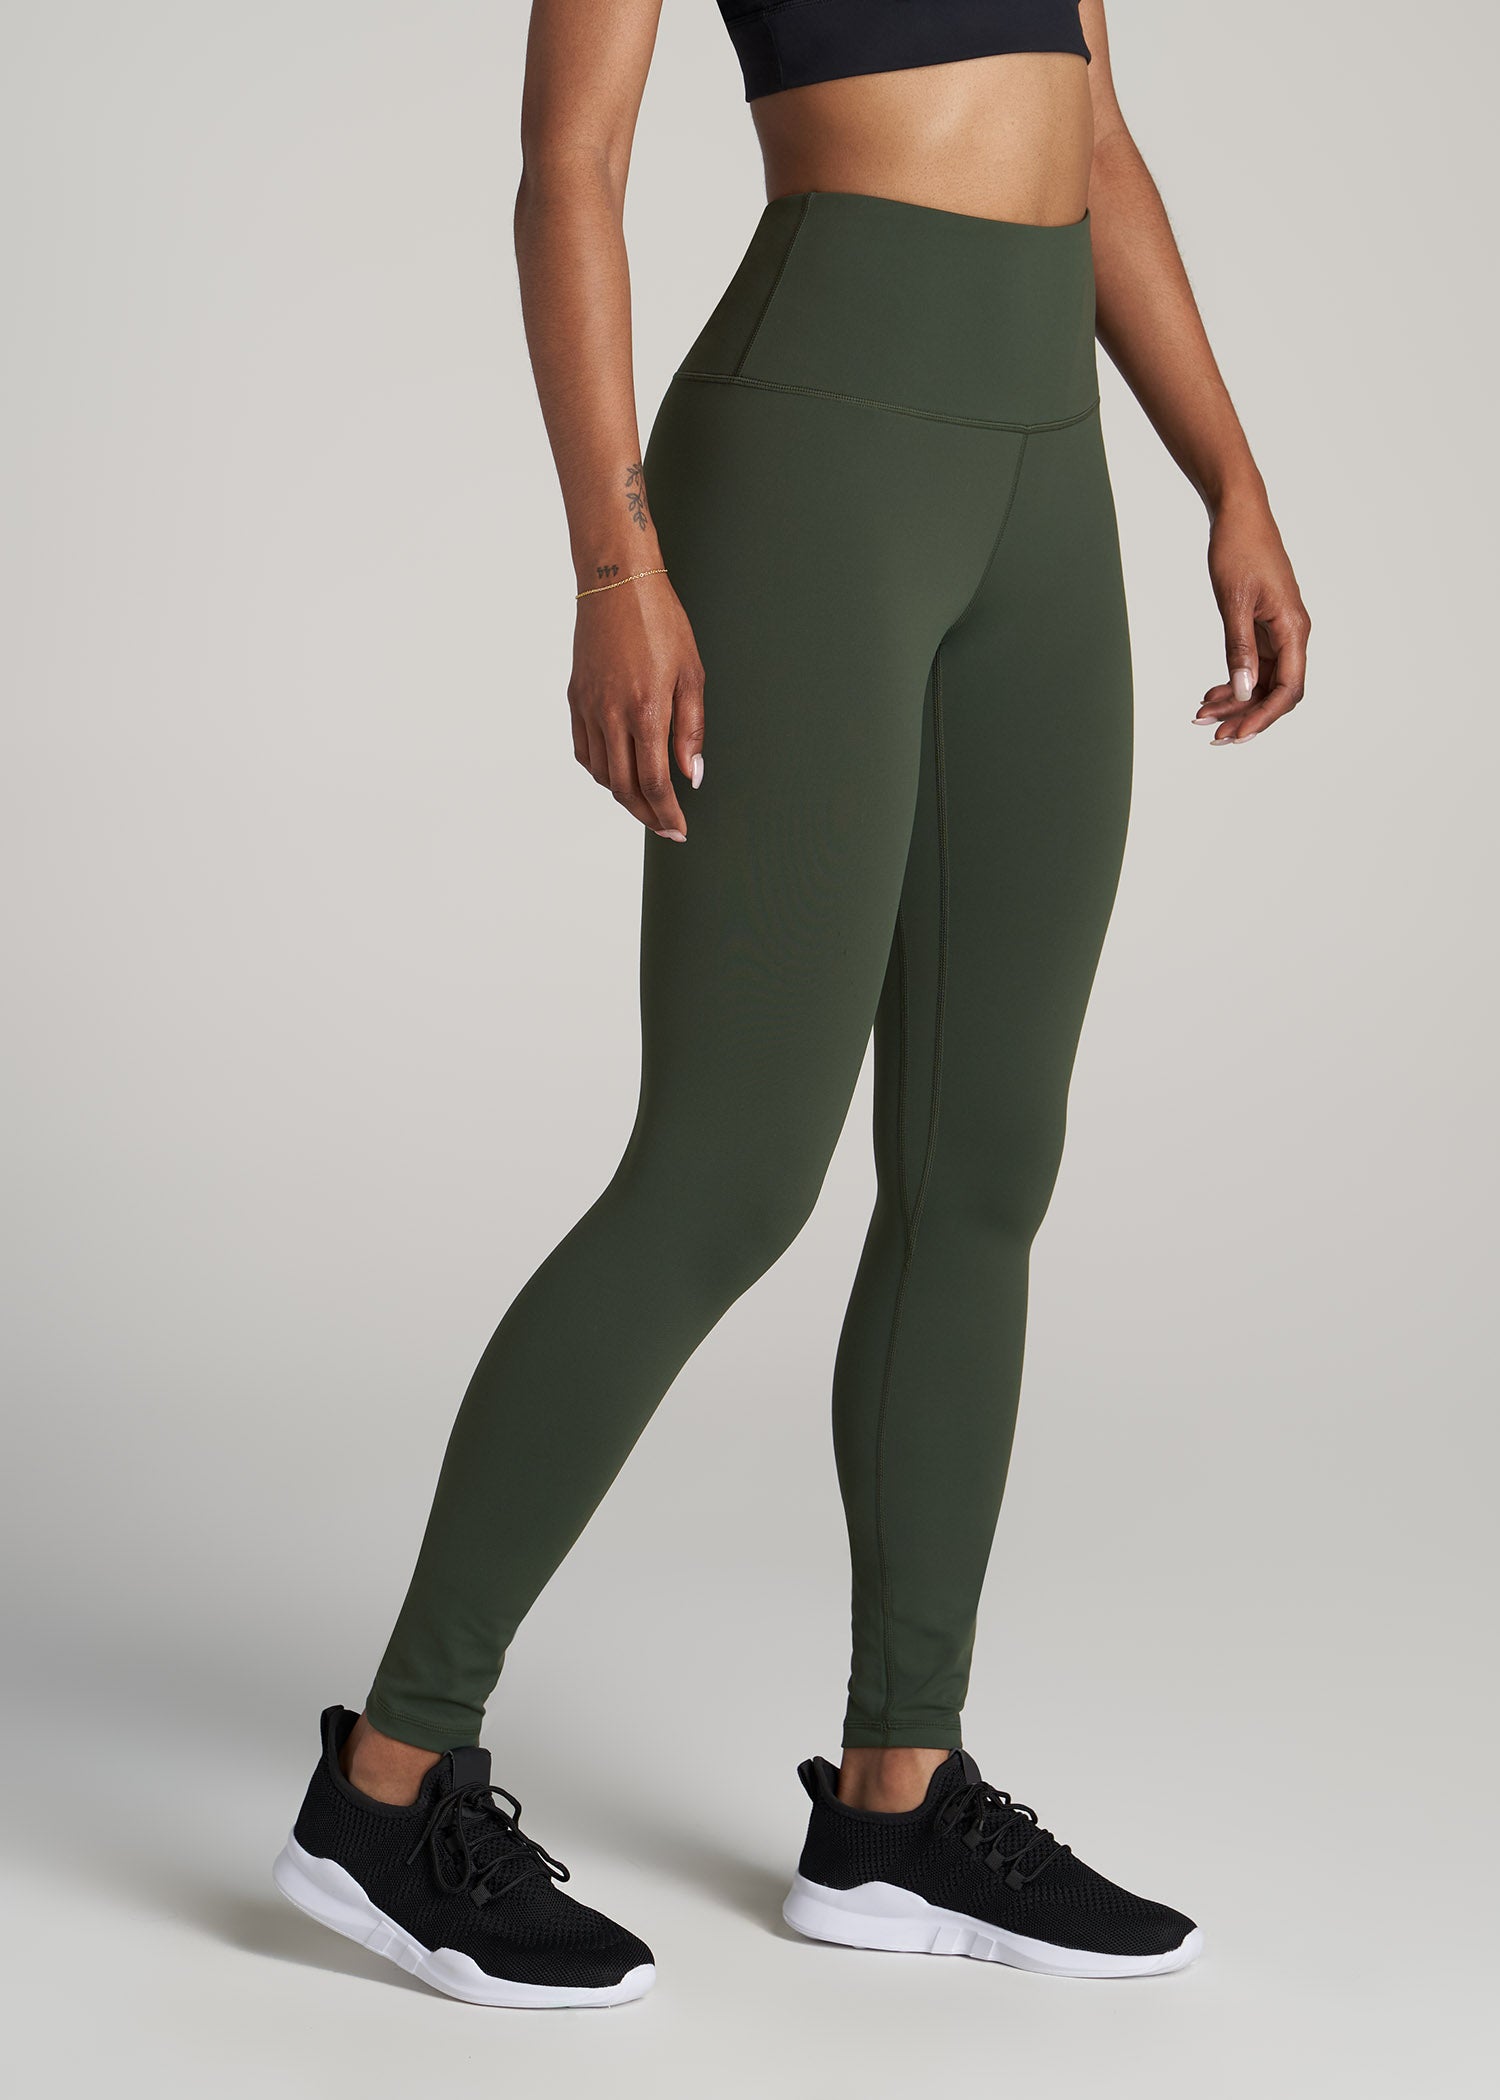 Olive Branch Tights – Better Tights